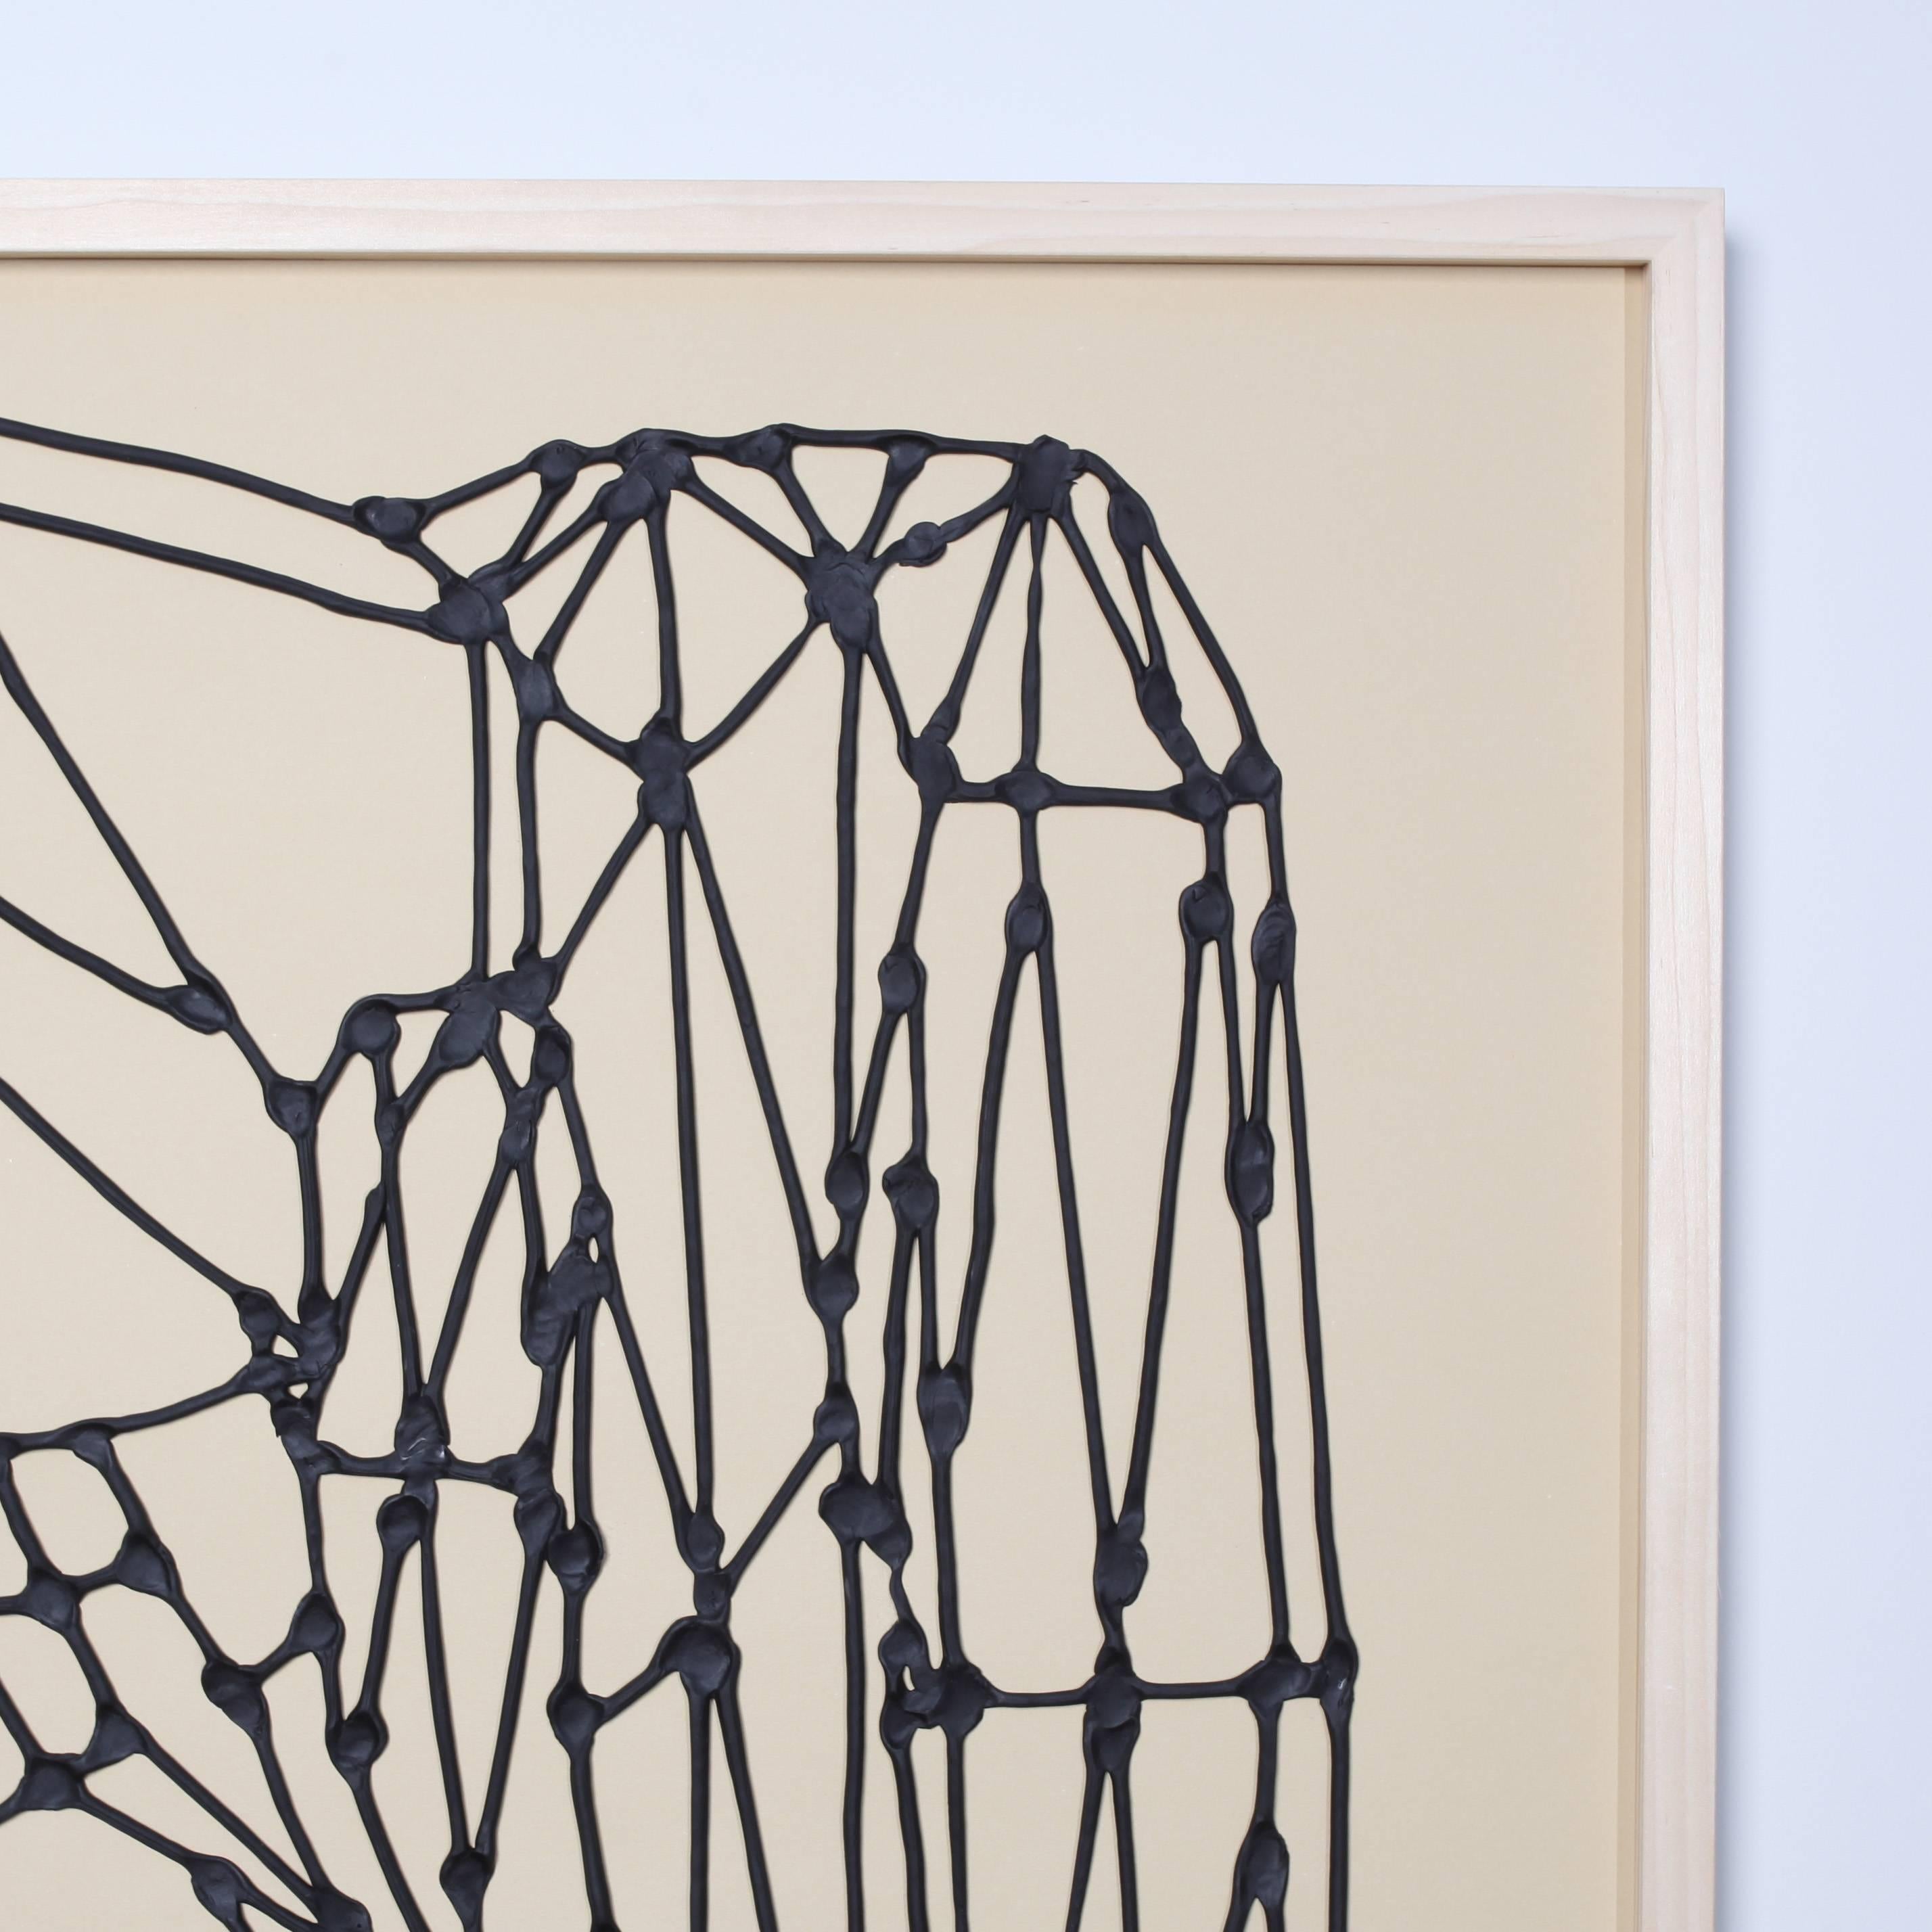 This is a very tactile drawing made from extruded black latex that rises above the surface of the paper. Each intersection of lines has been delicately molded, resulting in irregular traces of the artist's fingerprints.

Eric von Robertson’s